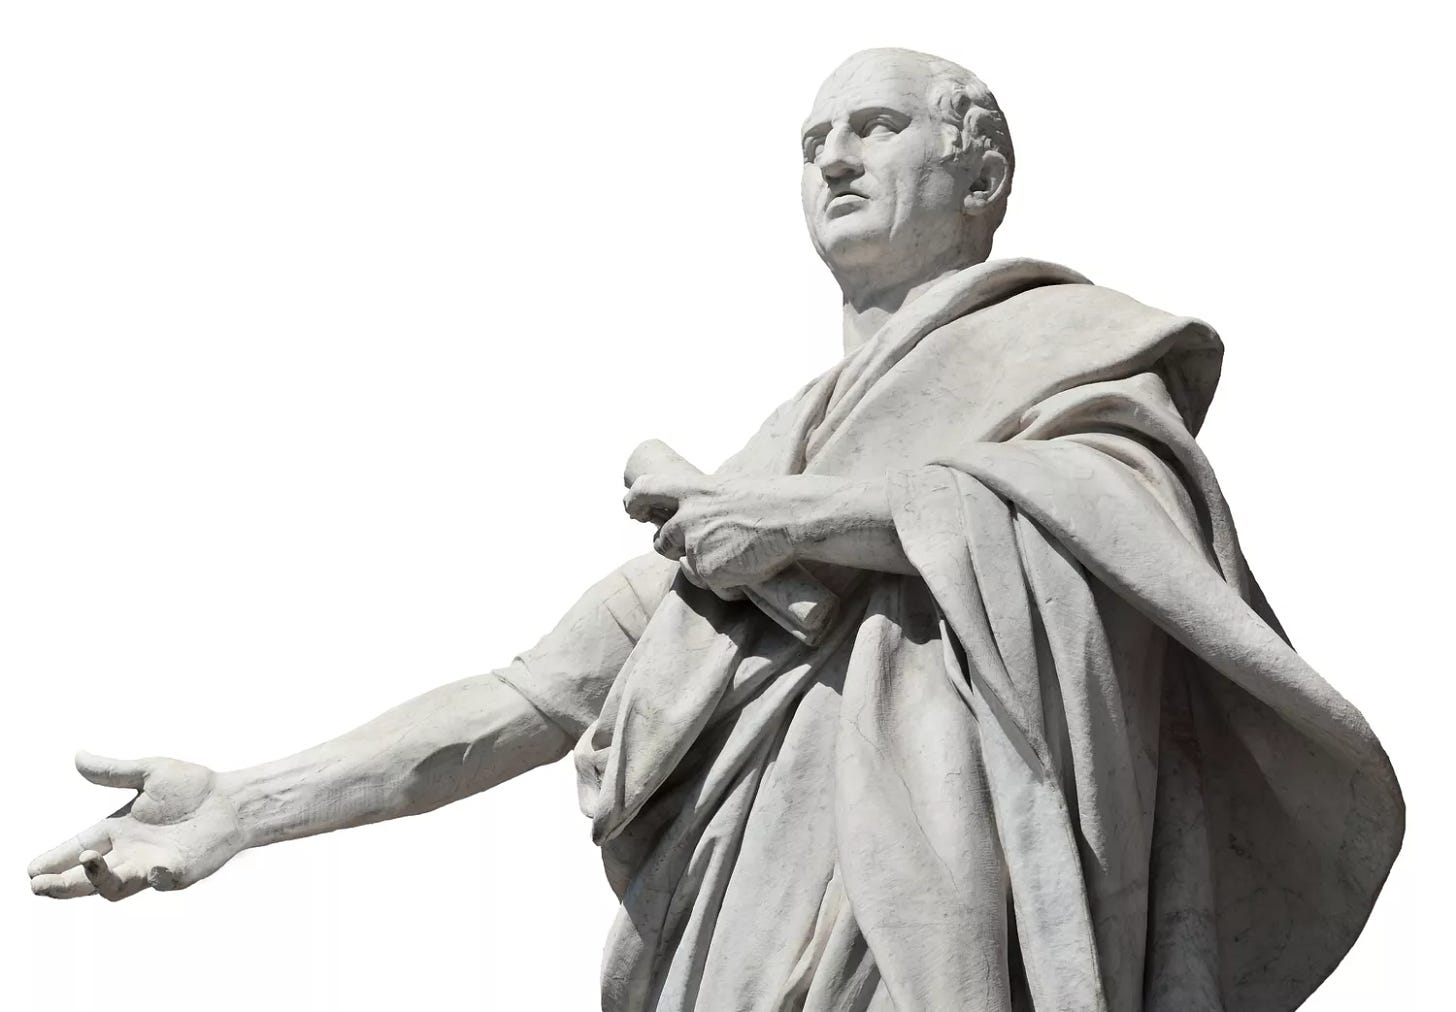 Cicero: 19th C. Statue, Palace of Justice in Rome, Italy